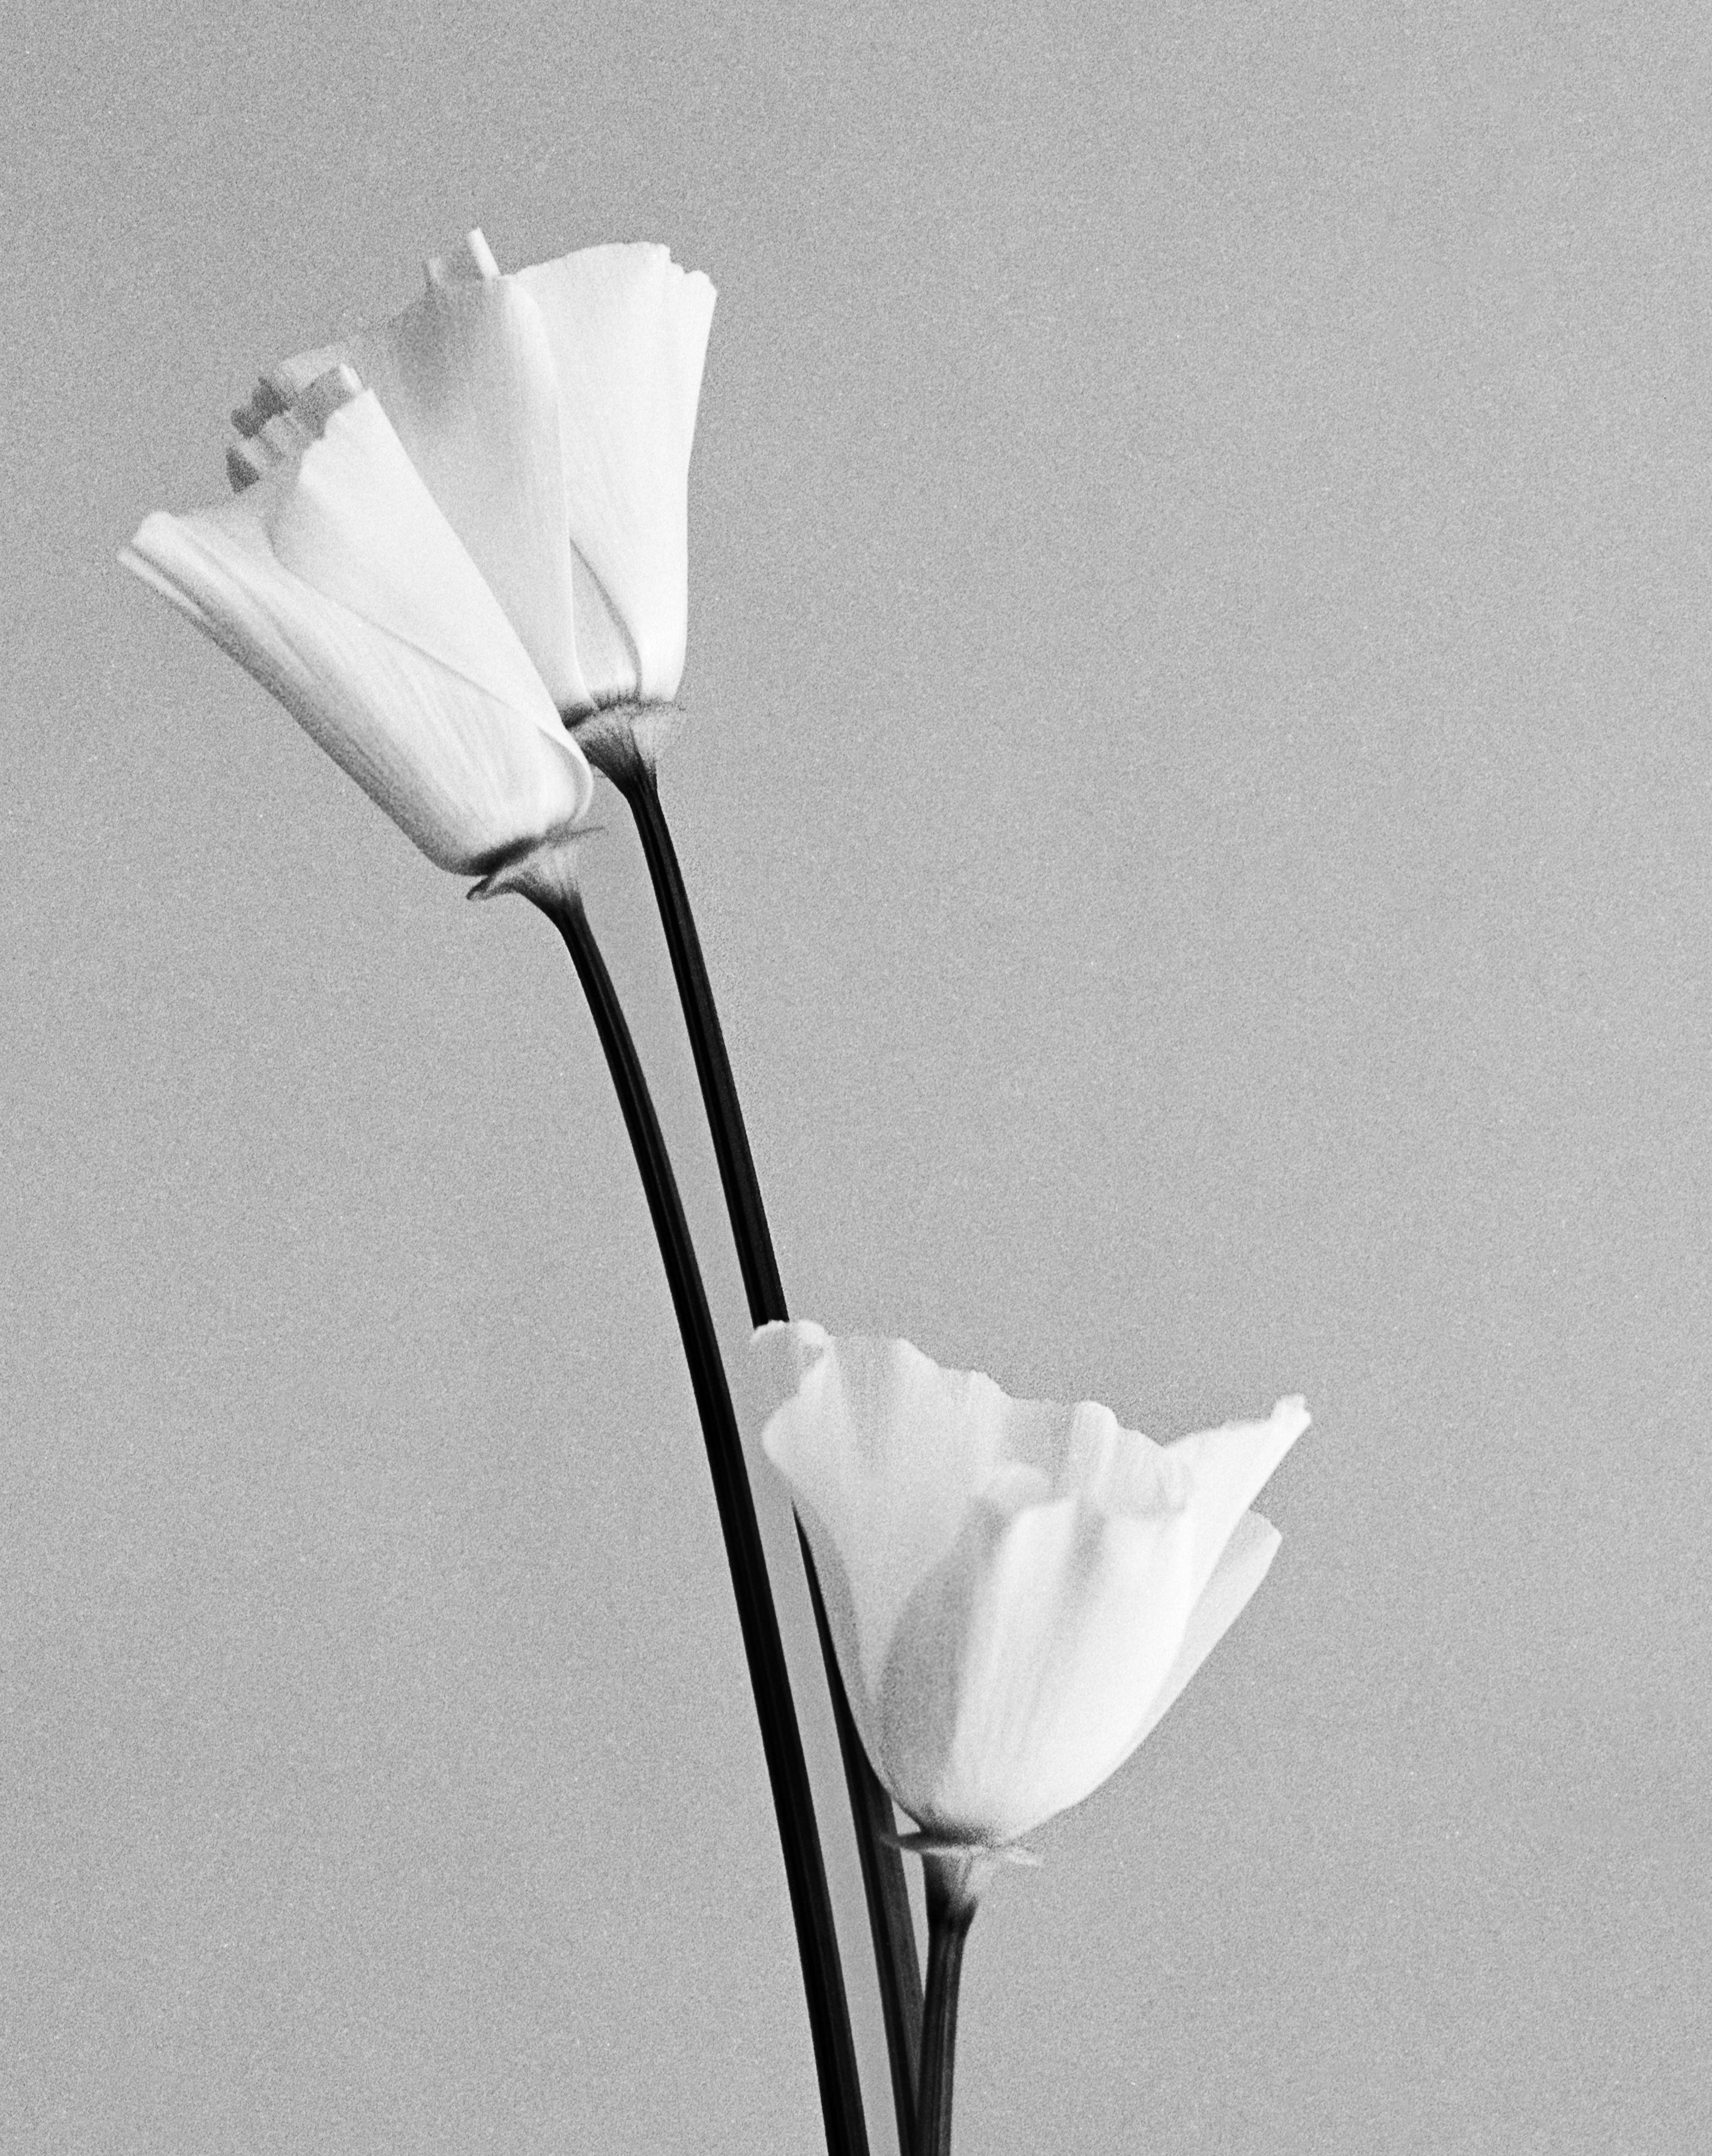 In Parallel - couple black and white poppies in vase, Limited edition of 5 - Contemporary Photograph by Ugne Pouwell